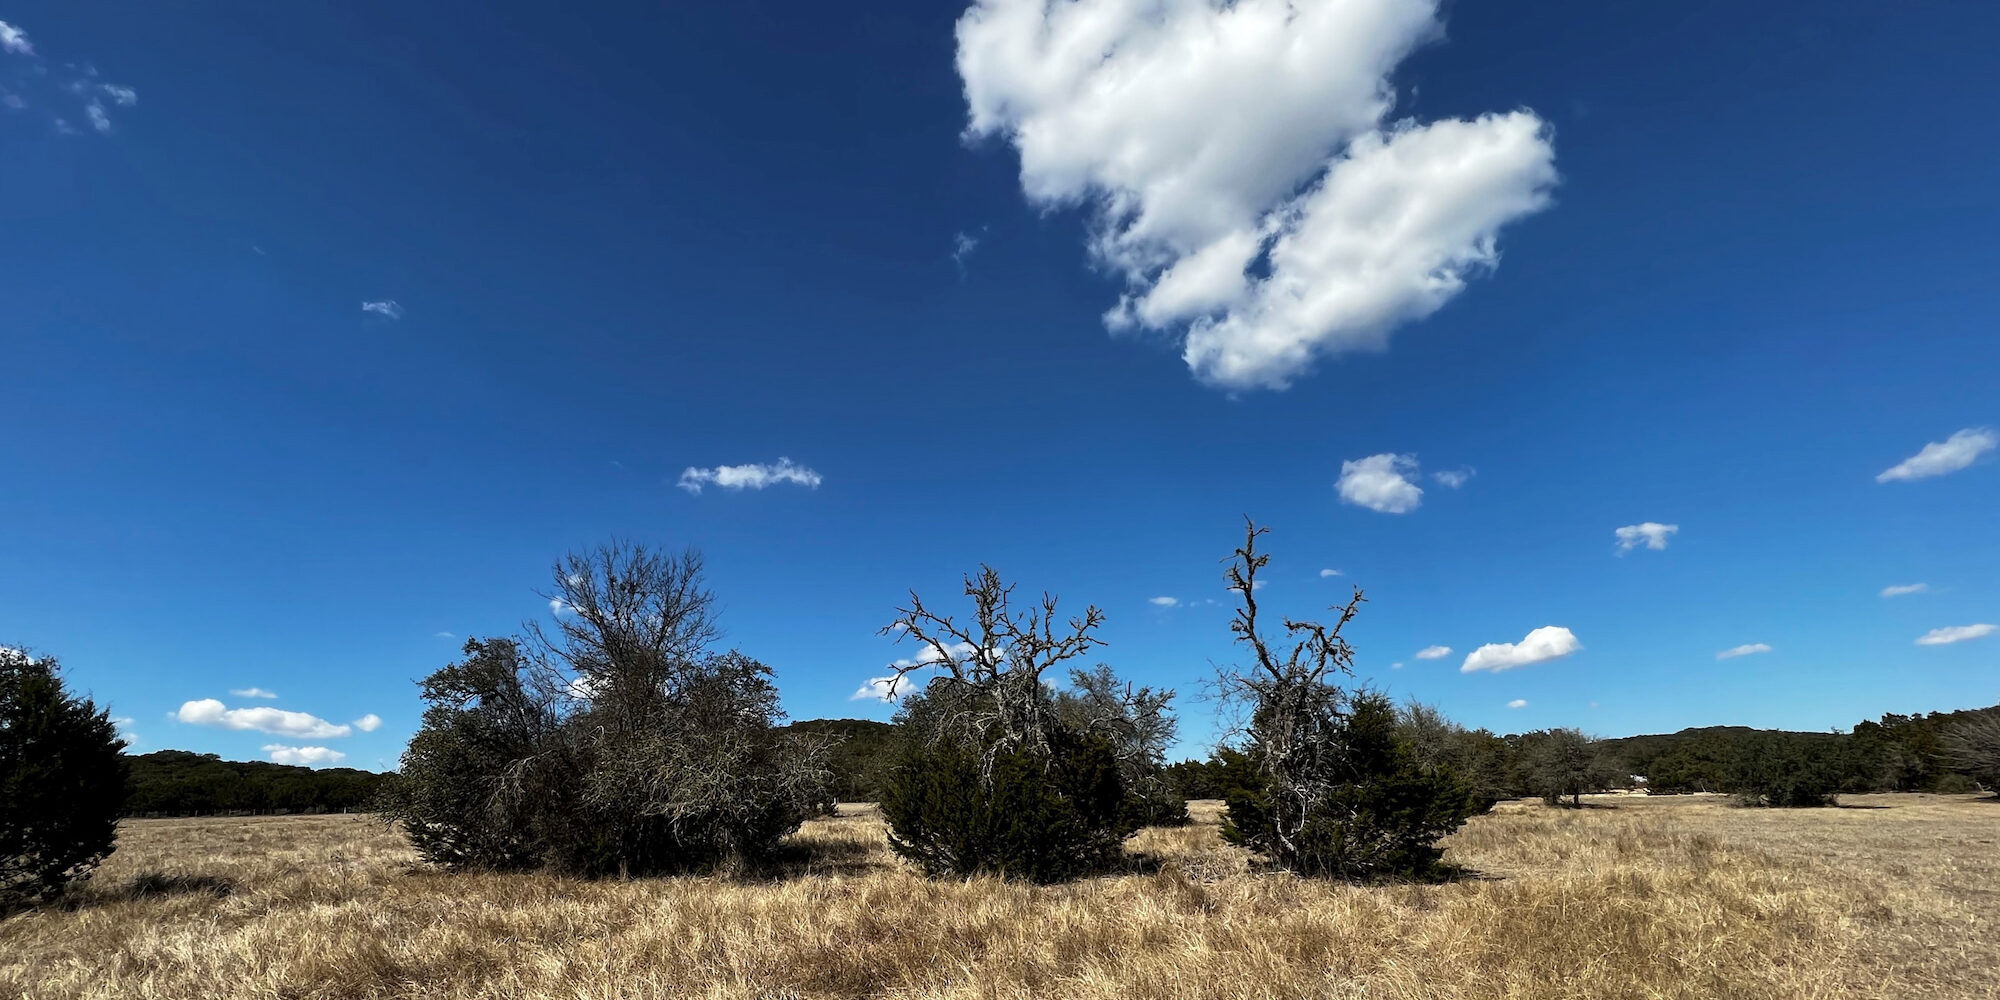 Clouds and a blue sky hang over a grazing pasture dotted with bushes in the foreground